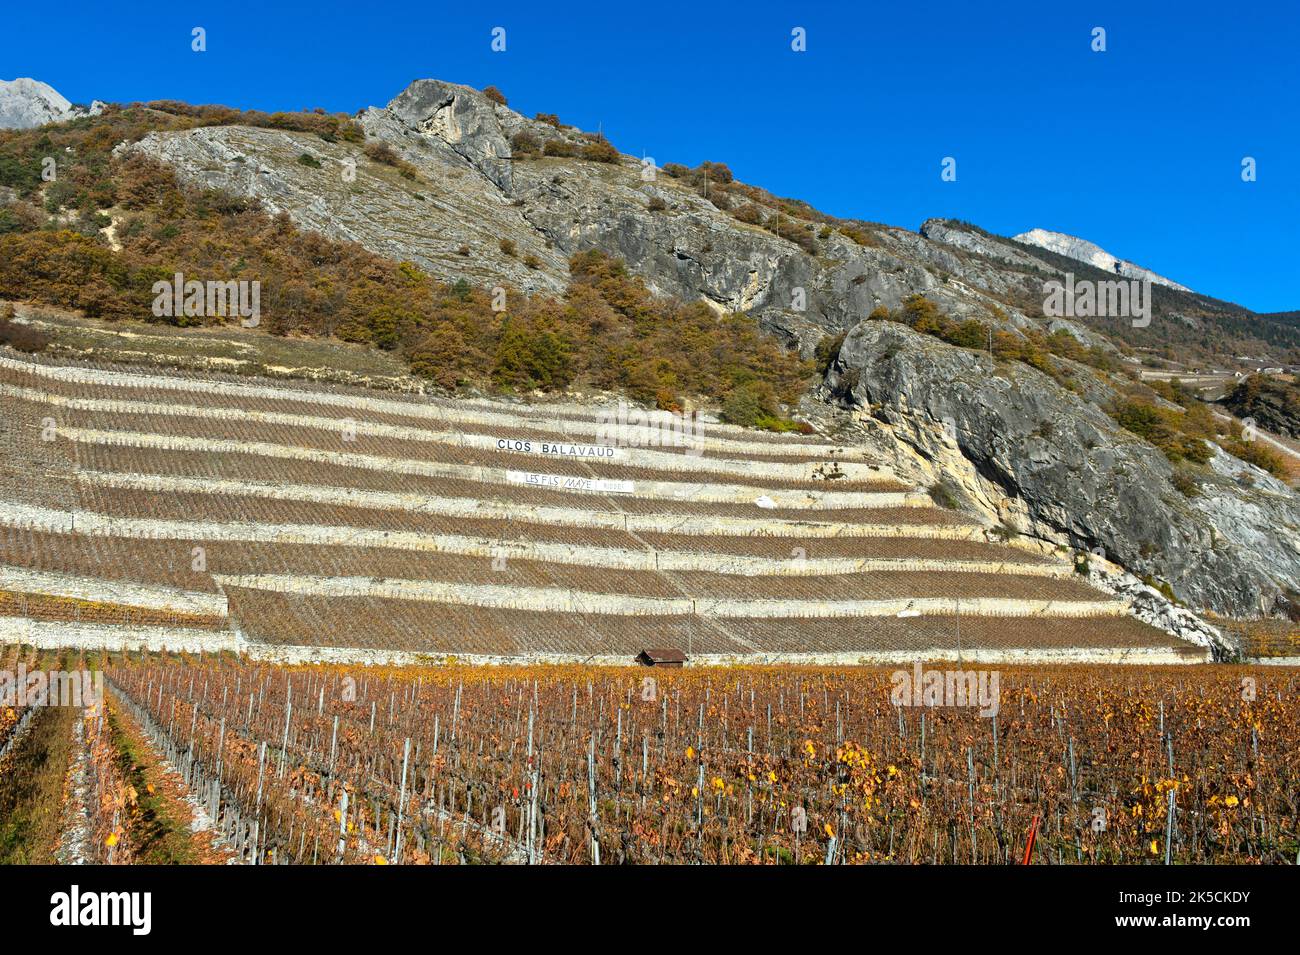 Vineyard terraces for the cultivation of the white wine Clos de Balavaud of the winery Fils Maye, Vetroz, Valais, Switzerland Stock Photo